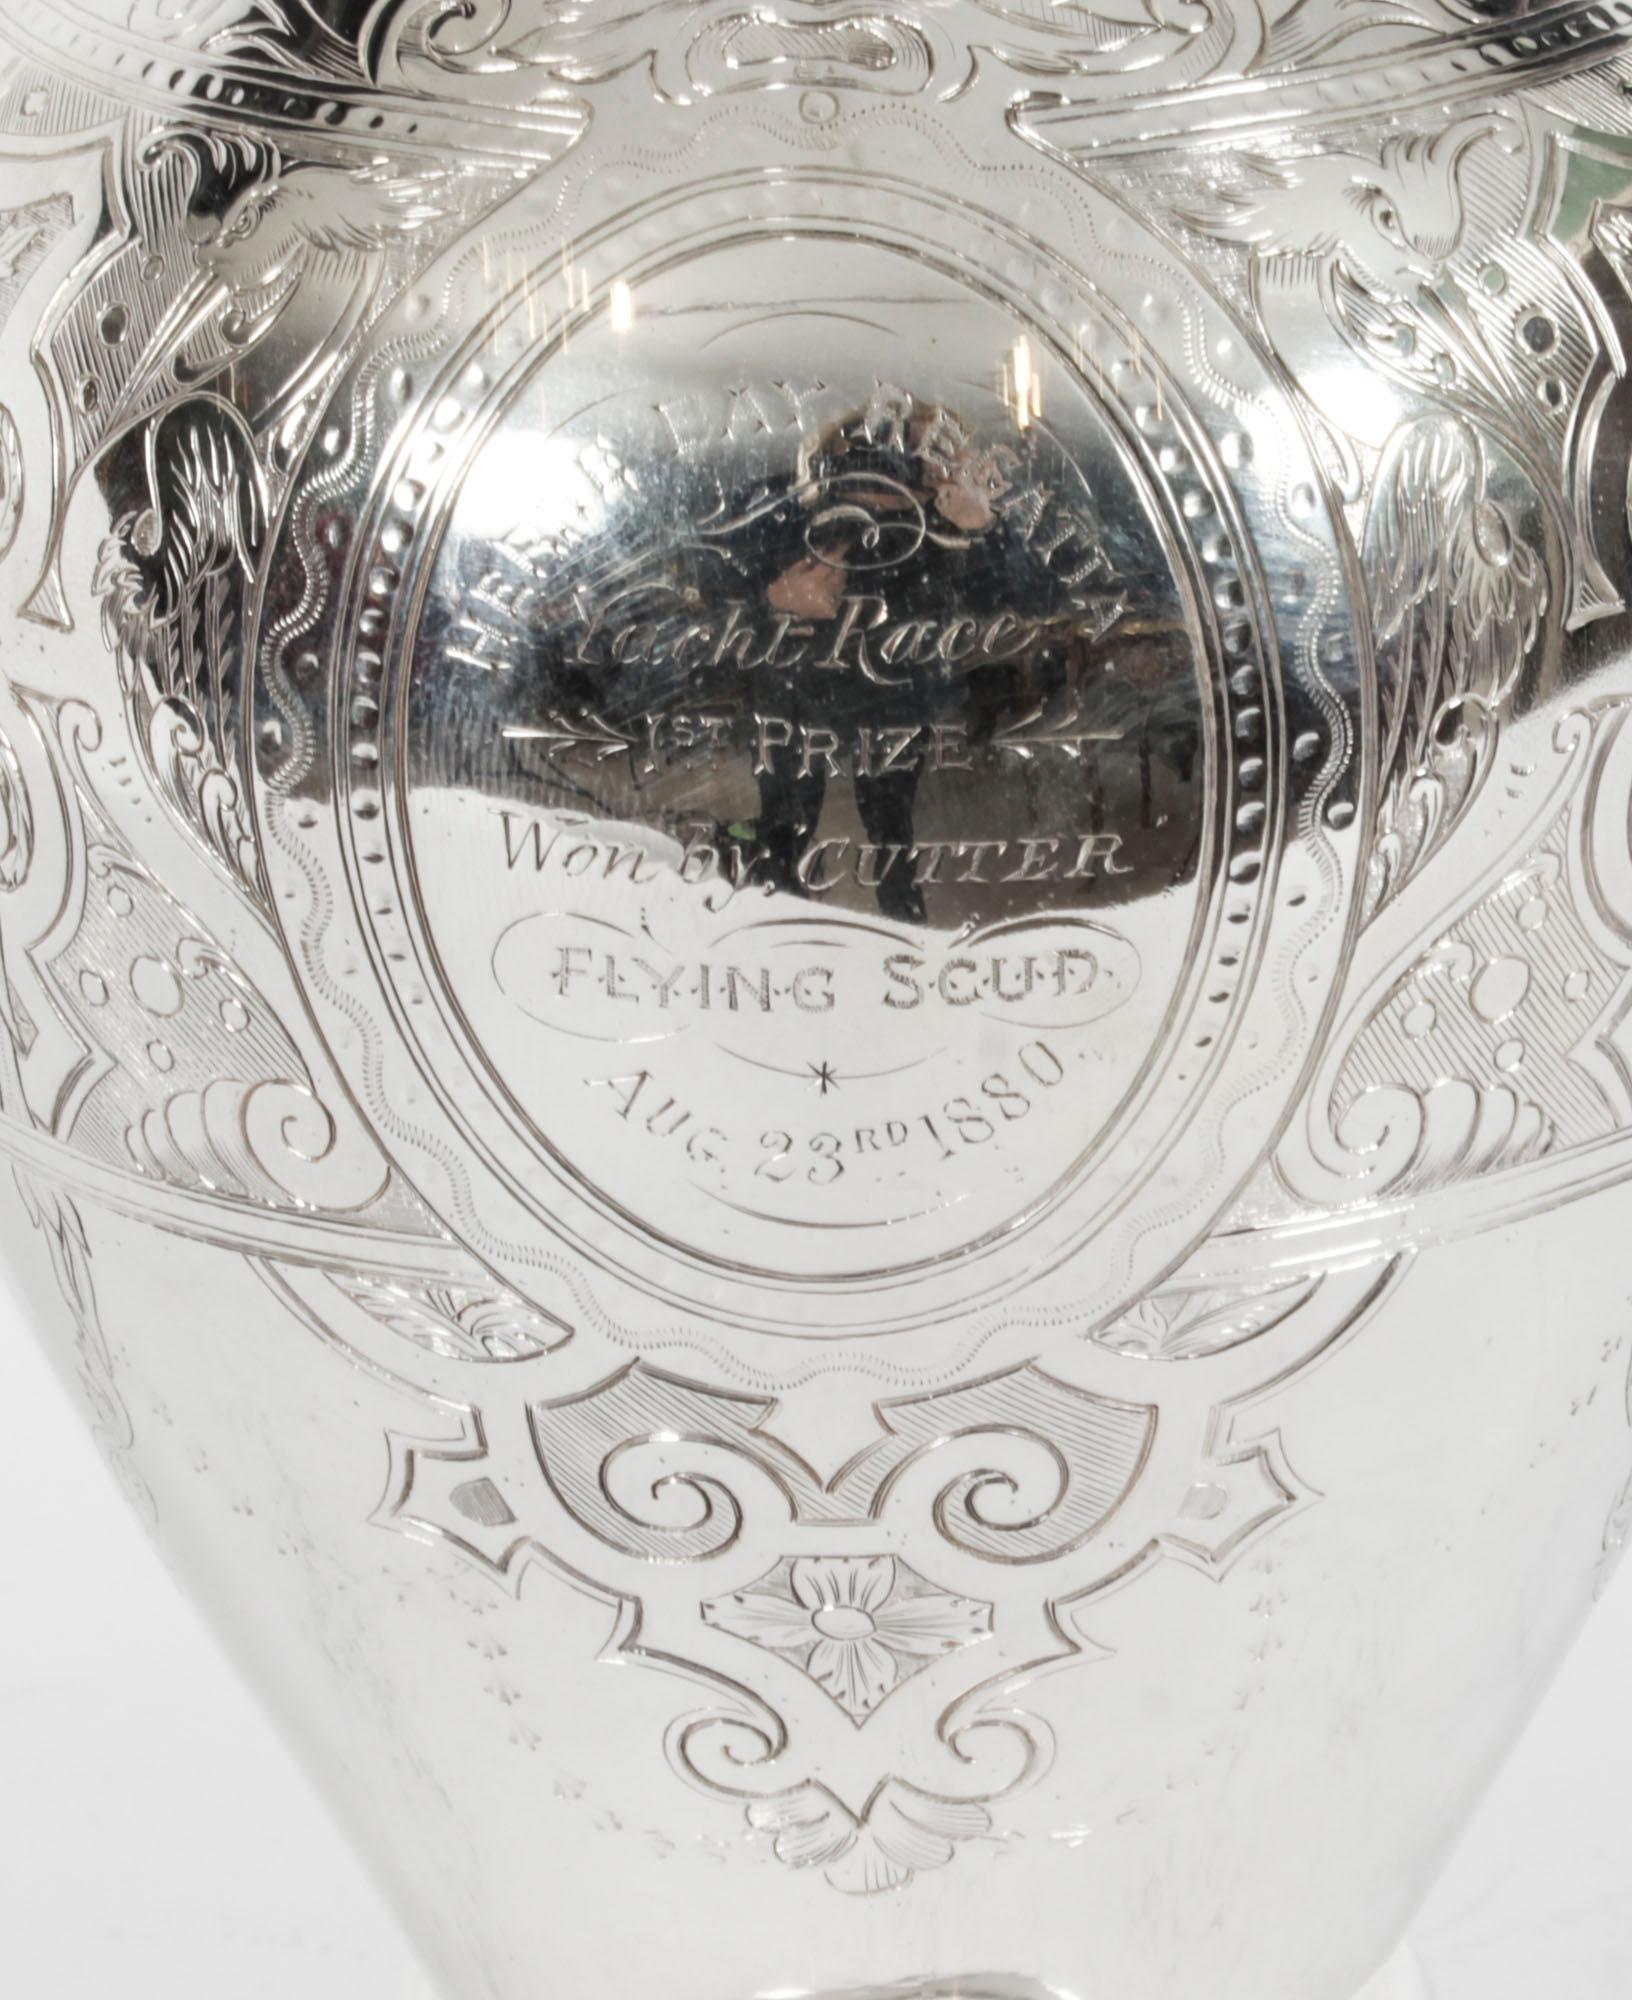 A wonderful antique English Victorian silver plate claret jug, circa 1880 in date.
 
It has an impressive handle and is embellished with the most wonderful engraved decoration.
 
It bears an interesting inscription
 
HERNE BAY REGATTA
YACHT